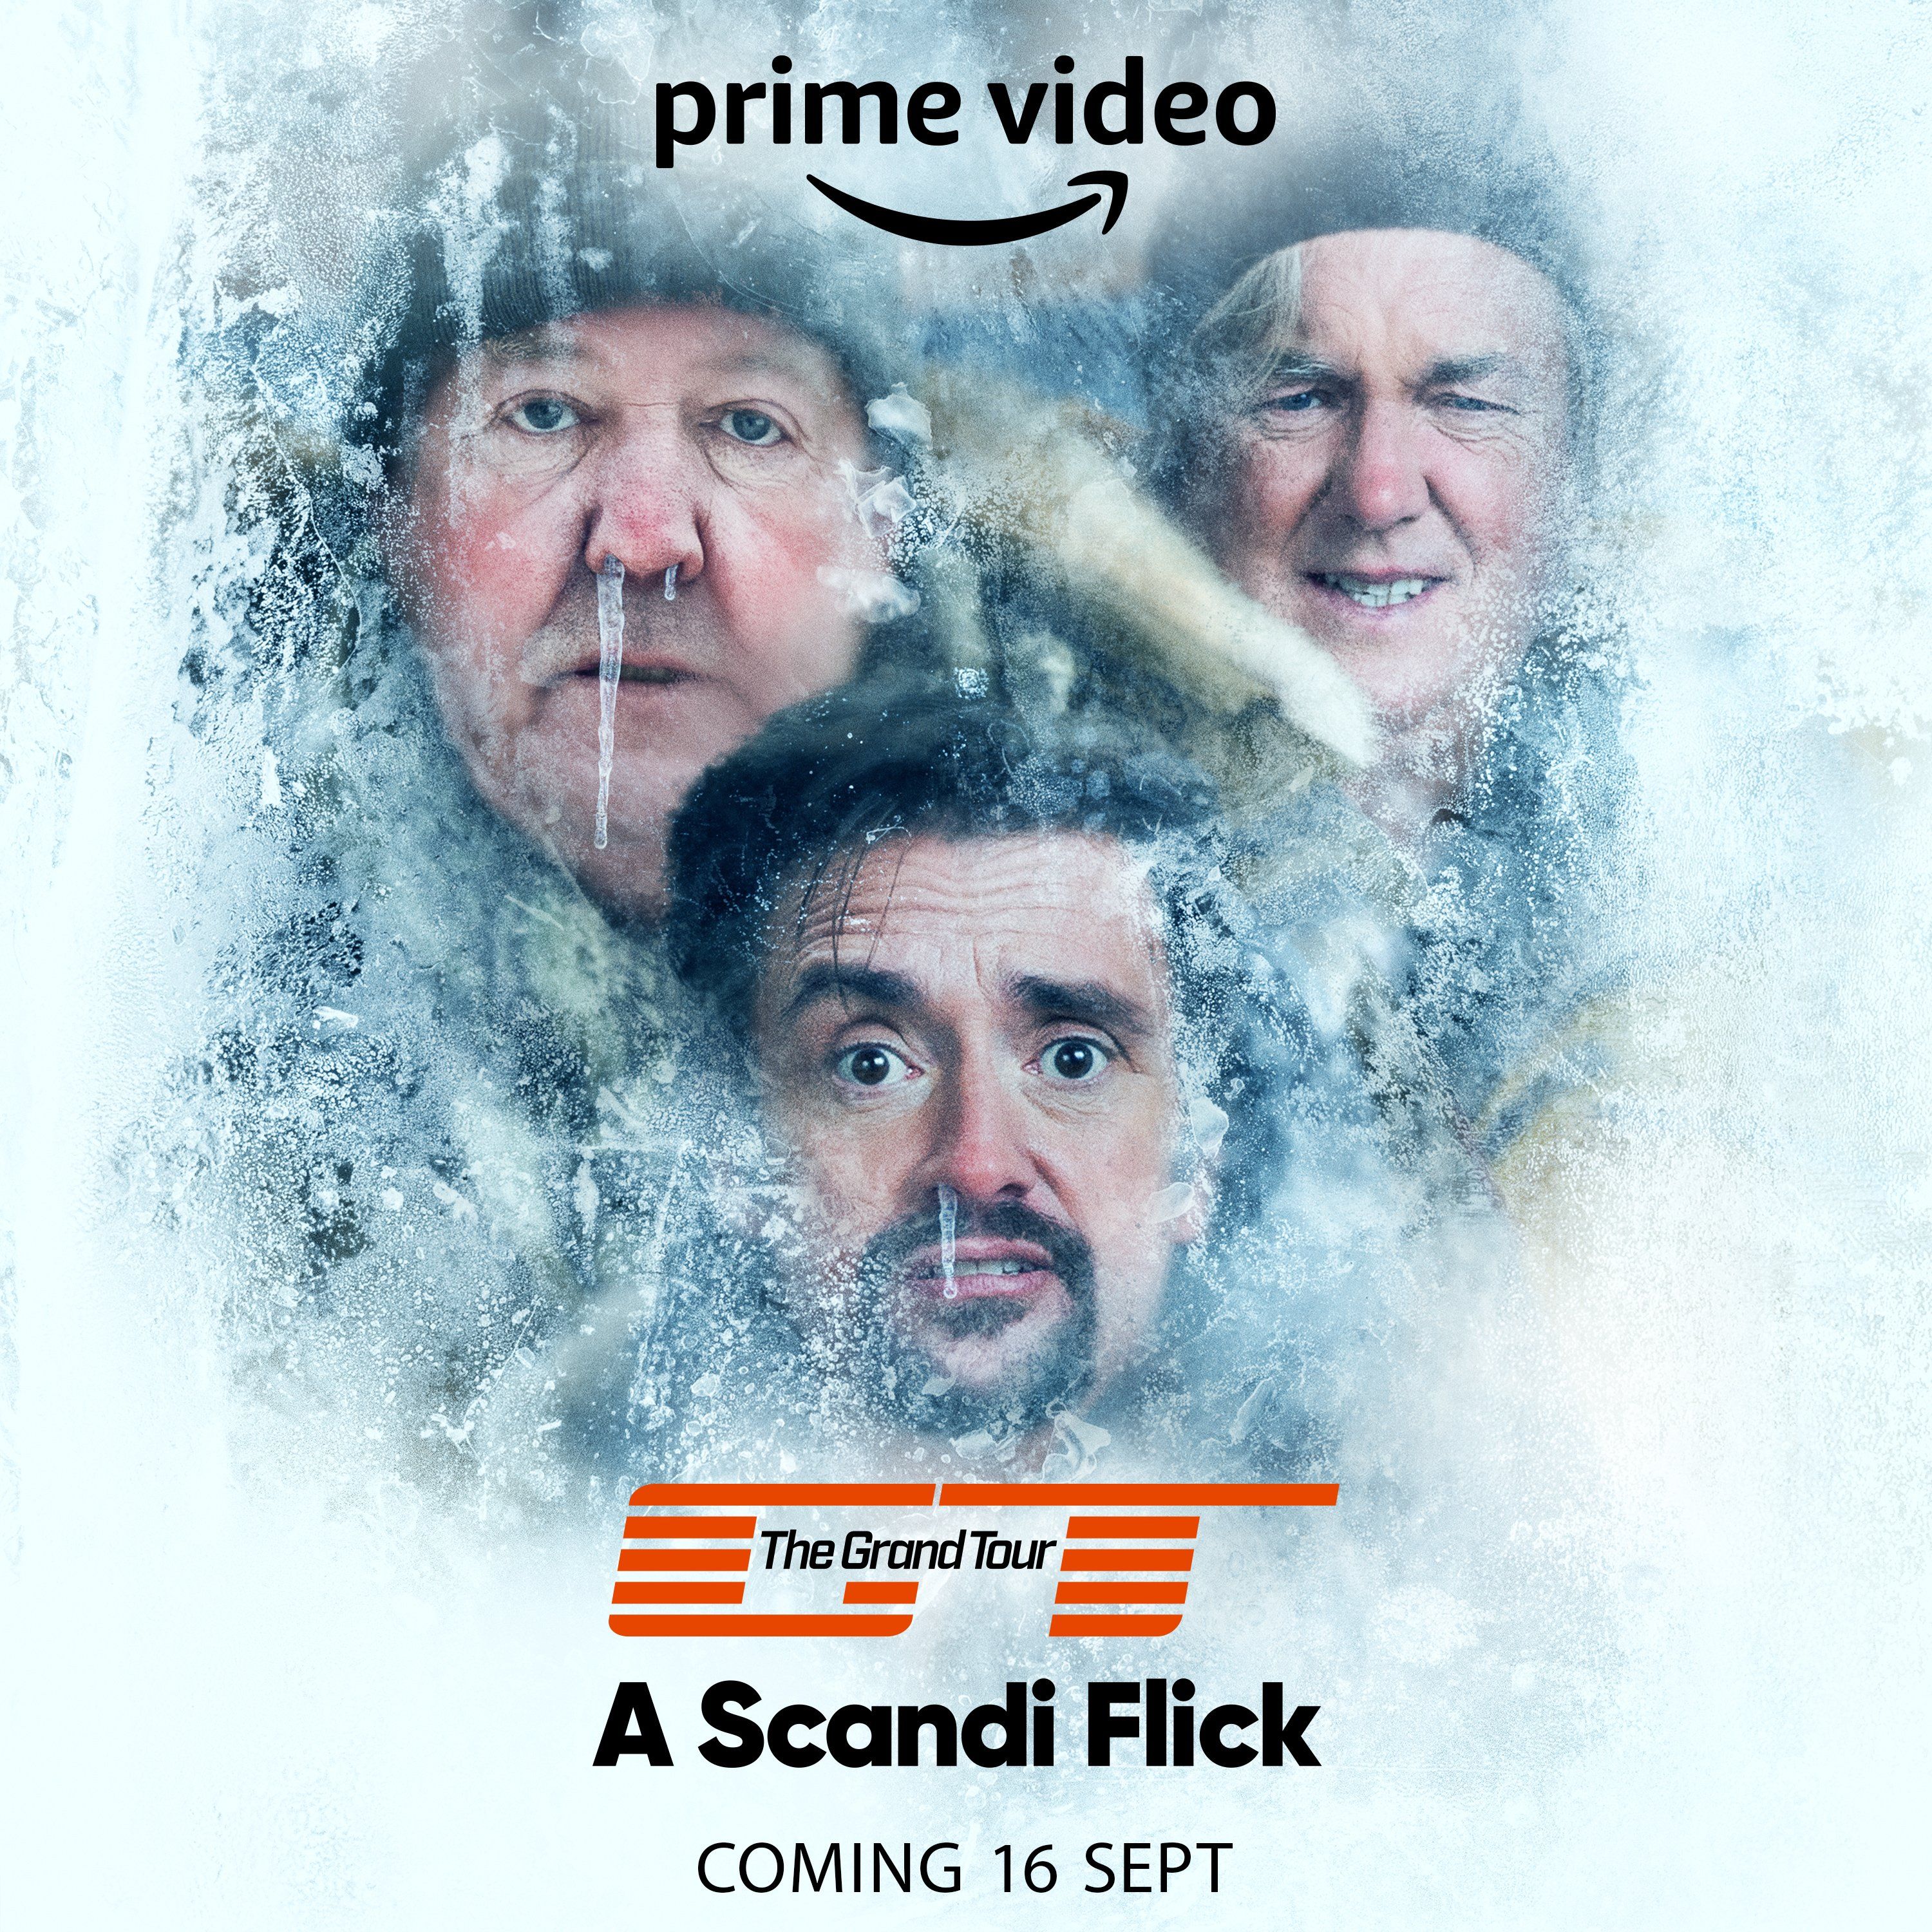 The Grand Tour A Scandi Flick Poster